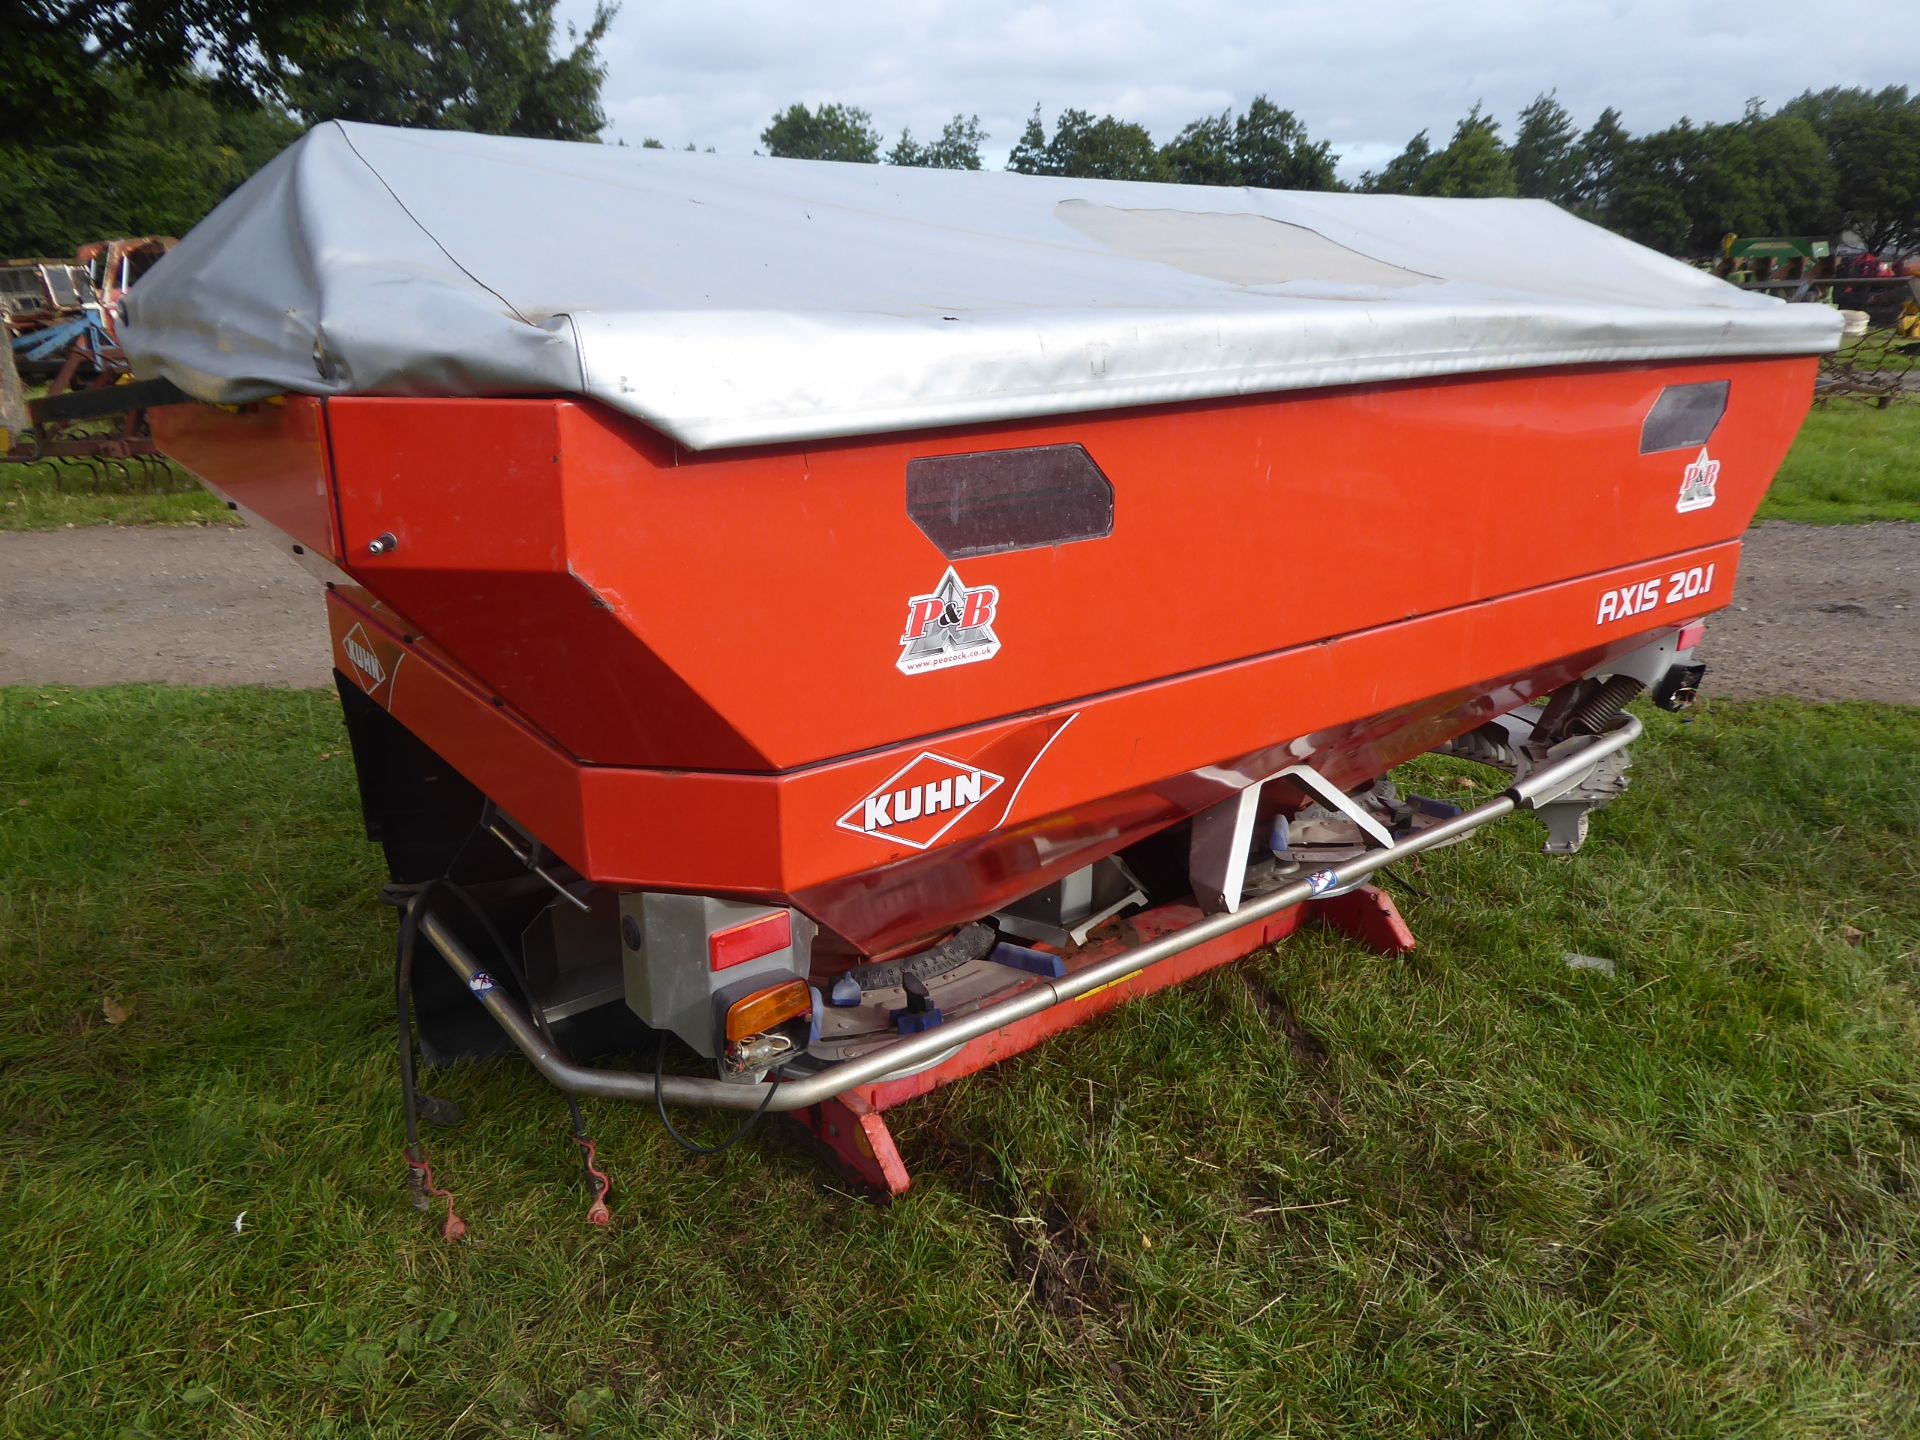 Kuhn Axis 20.1 12-18m spreader hardcoated discs, 2011, GWO - Image 4 of 4